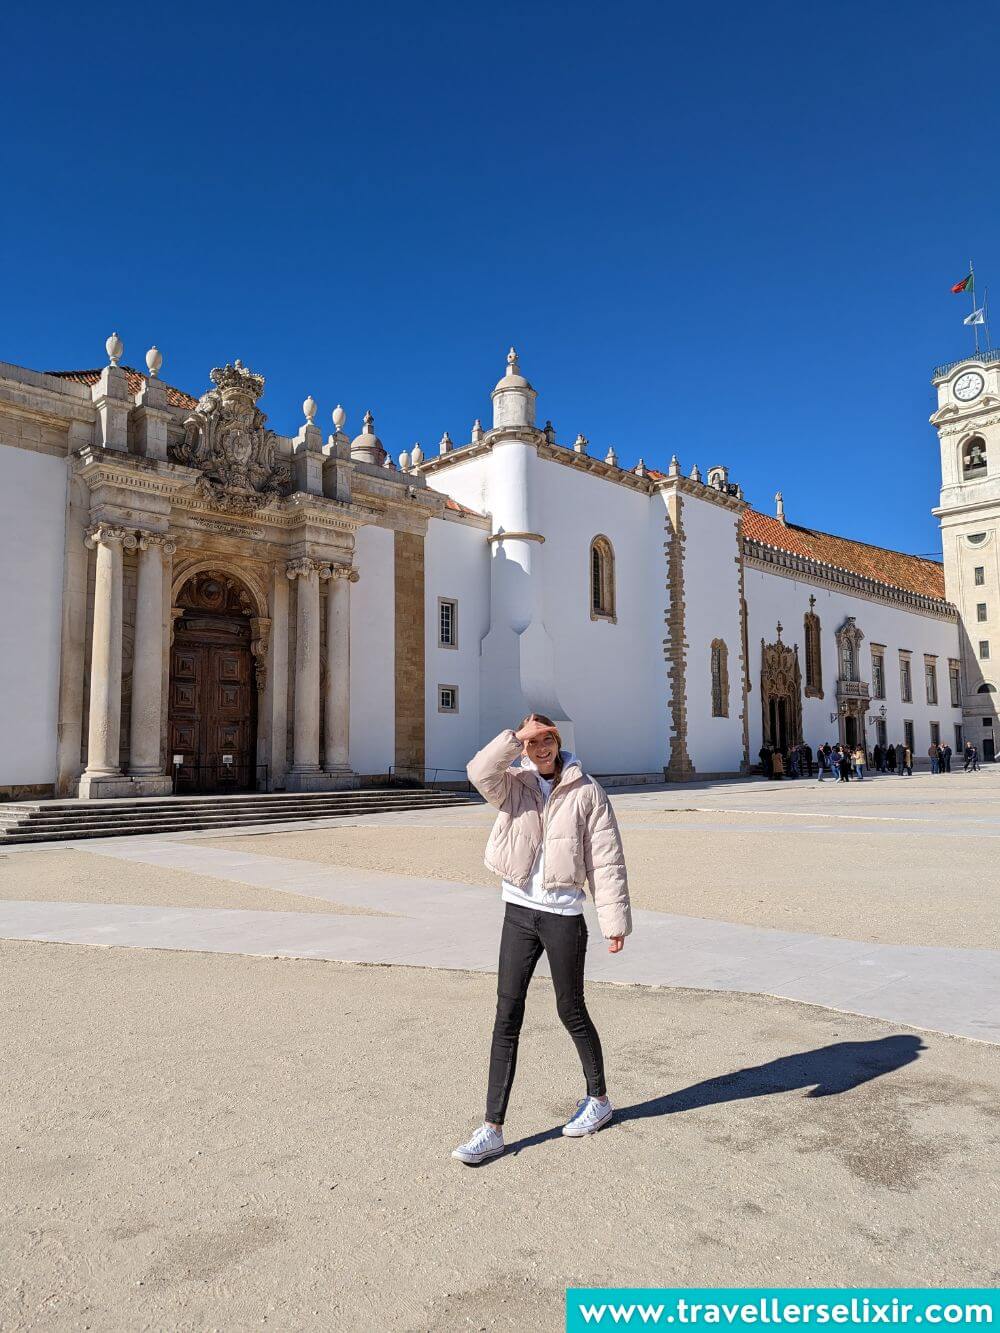 Photo of me at the University of Coimbra.